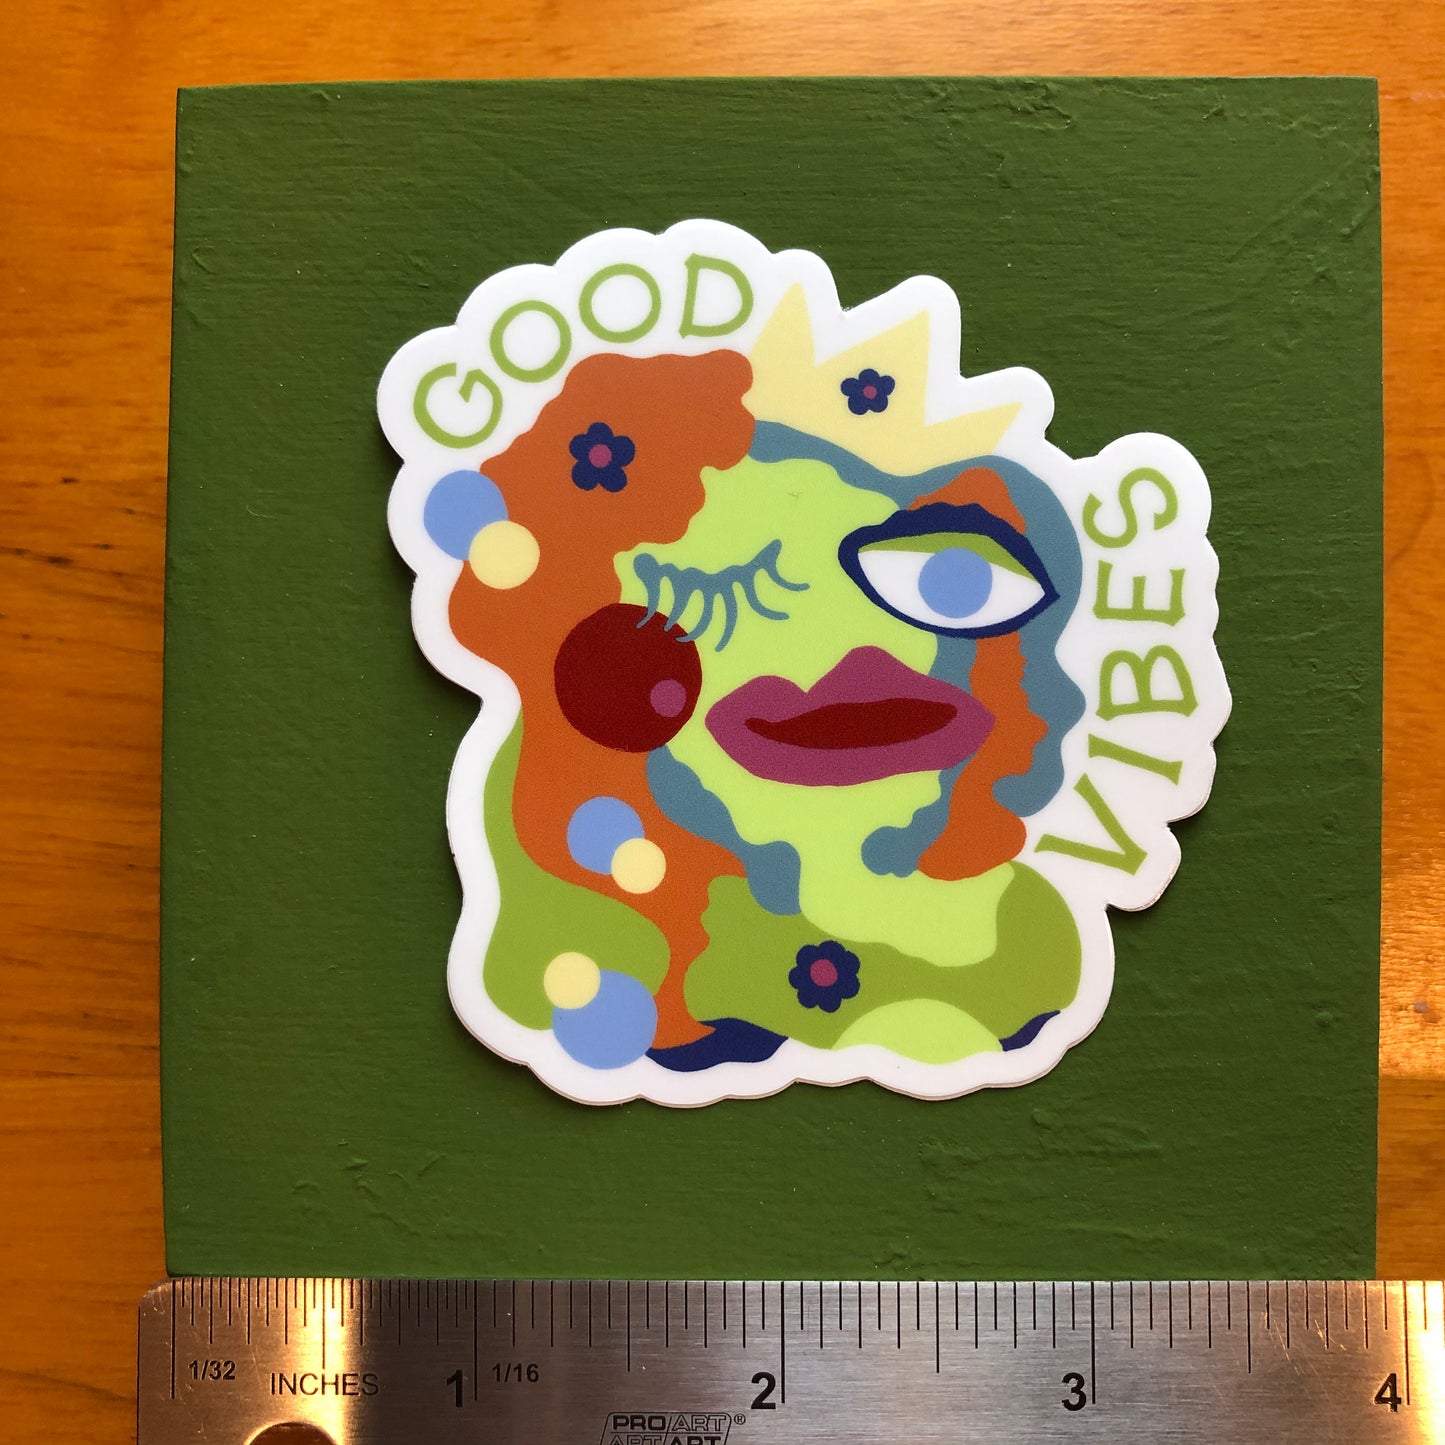 Good Vibes | 3 Inch Full-Color Die Cut Sticker